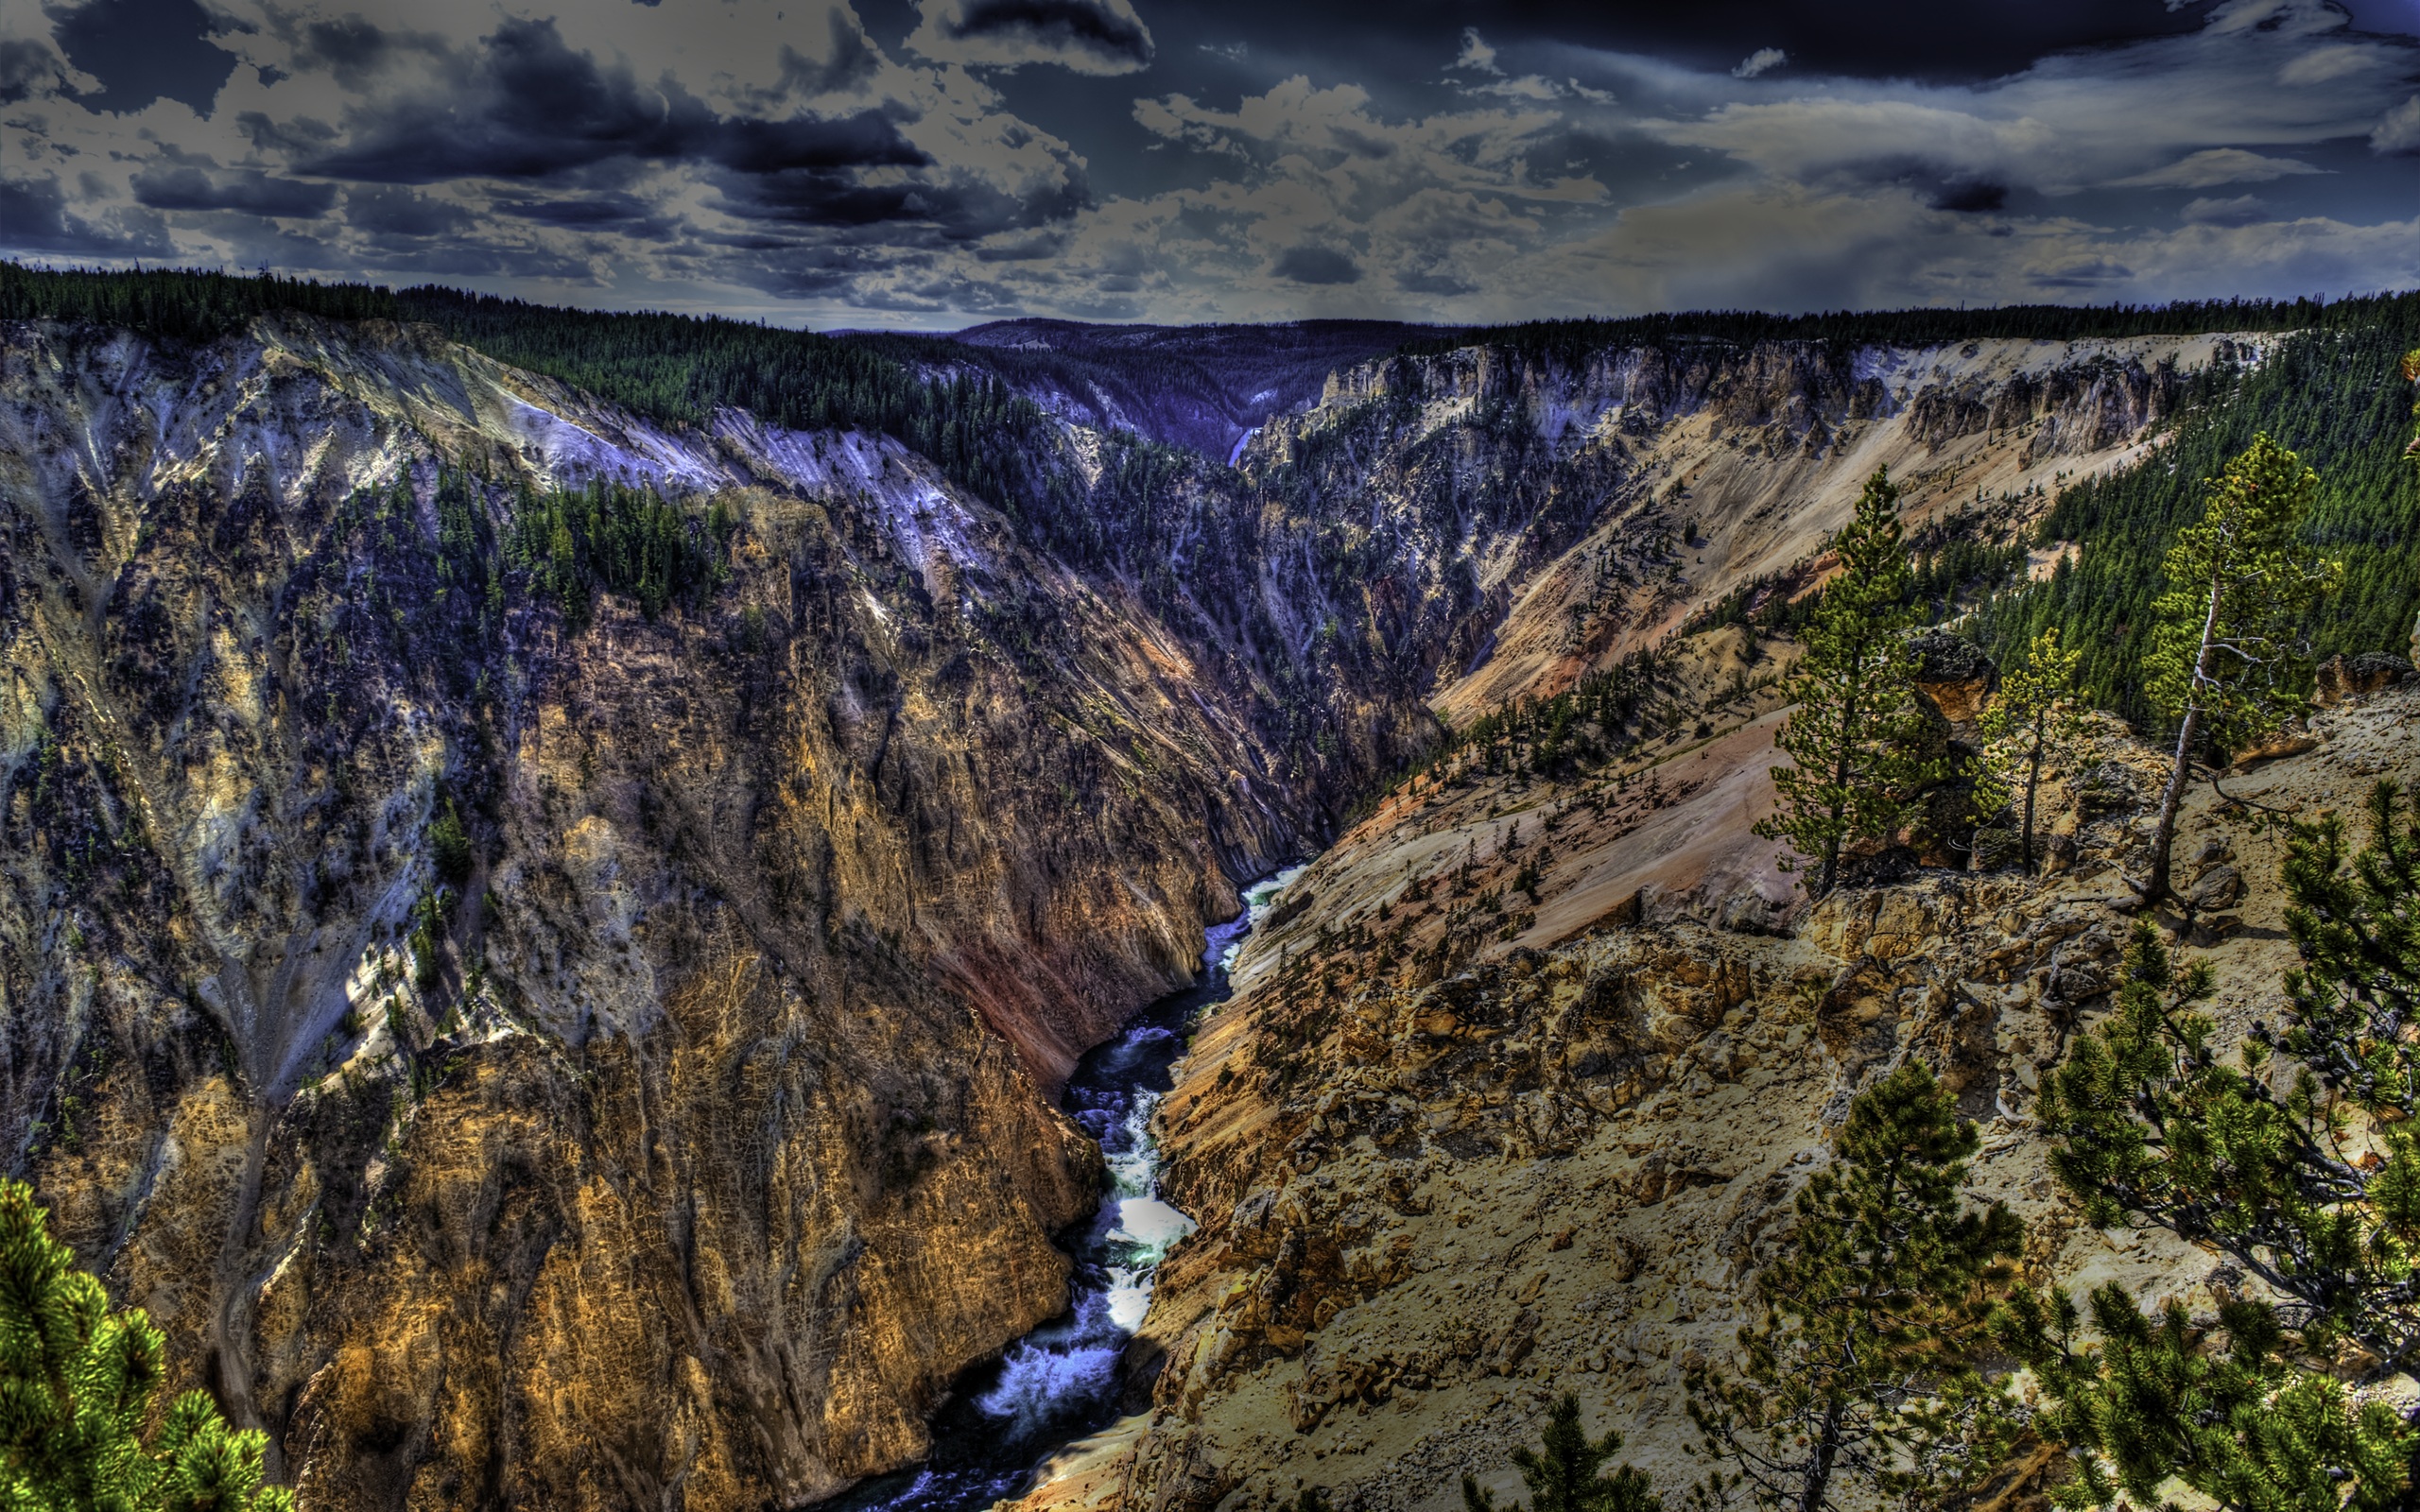 Grand Canyon of the Yellowstone in Yellowstone National Park, showcasing a beautiful HDR river in the canyon.